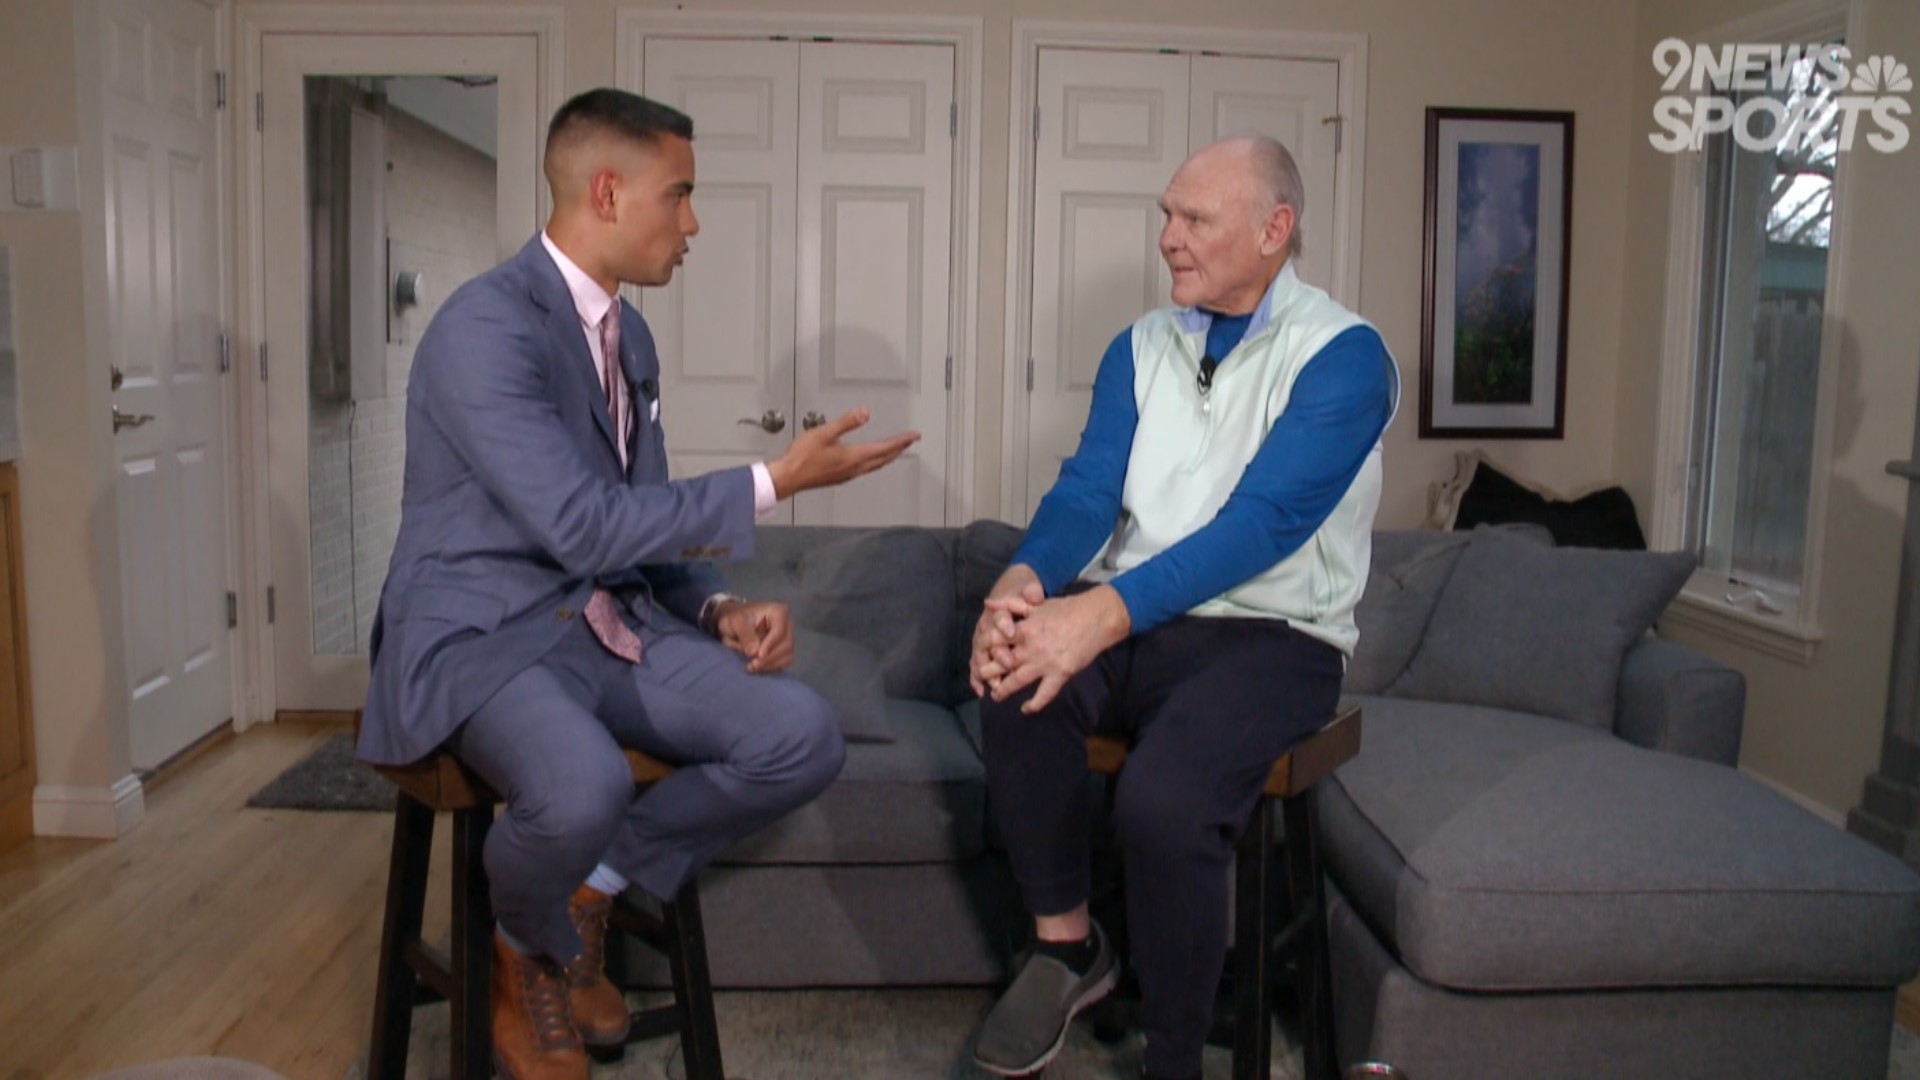 9NEWS Sports Anchor Jacob Tobey sat down with legendary basketball coach George Karl to talk about his Hall of Fame induction, the Denver Nuggets and more.